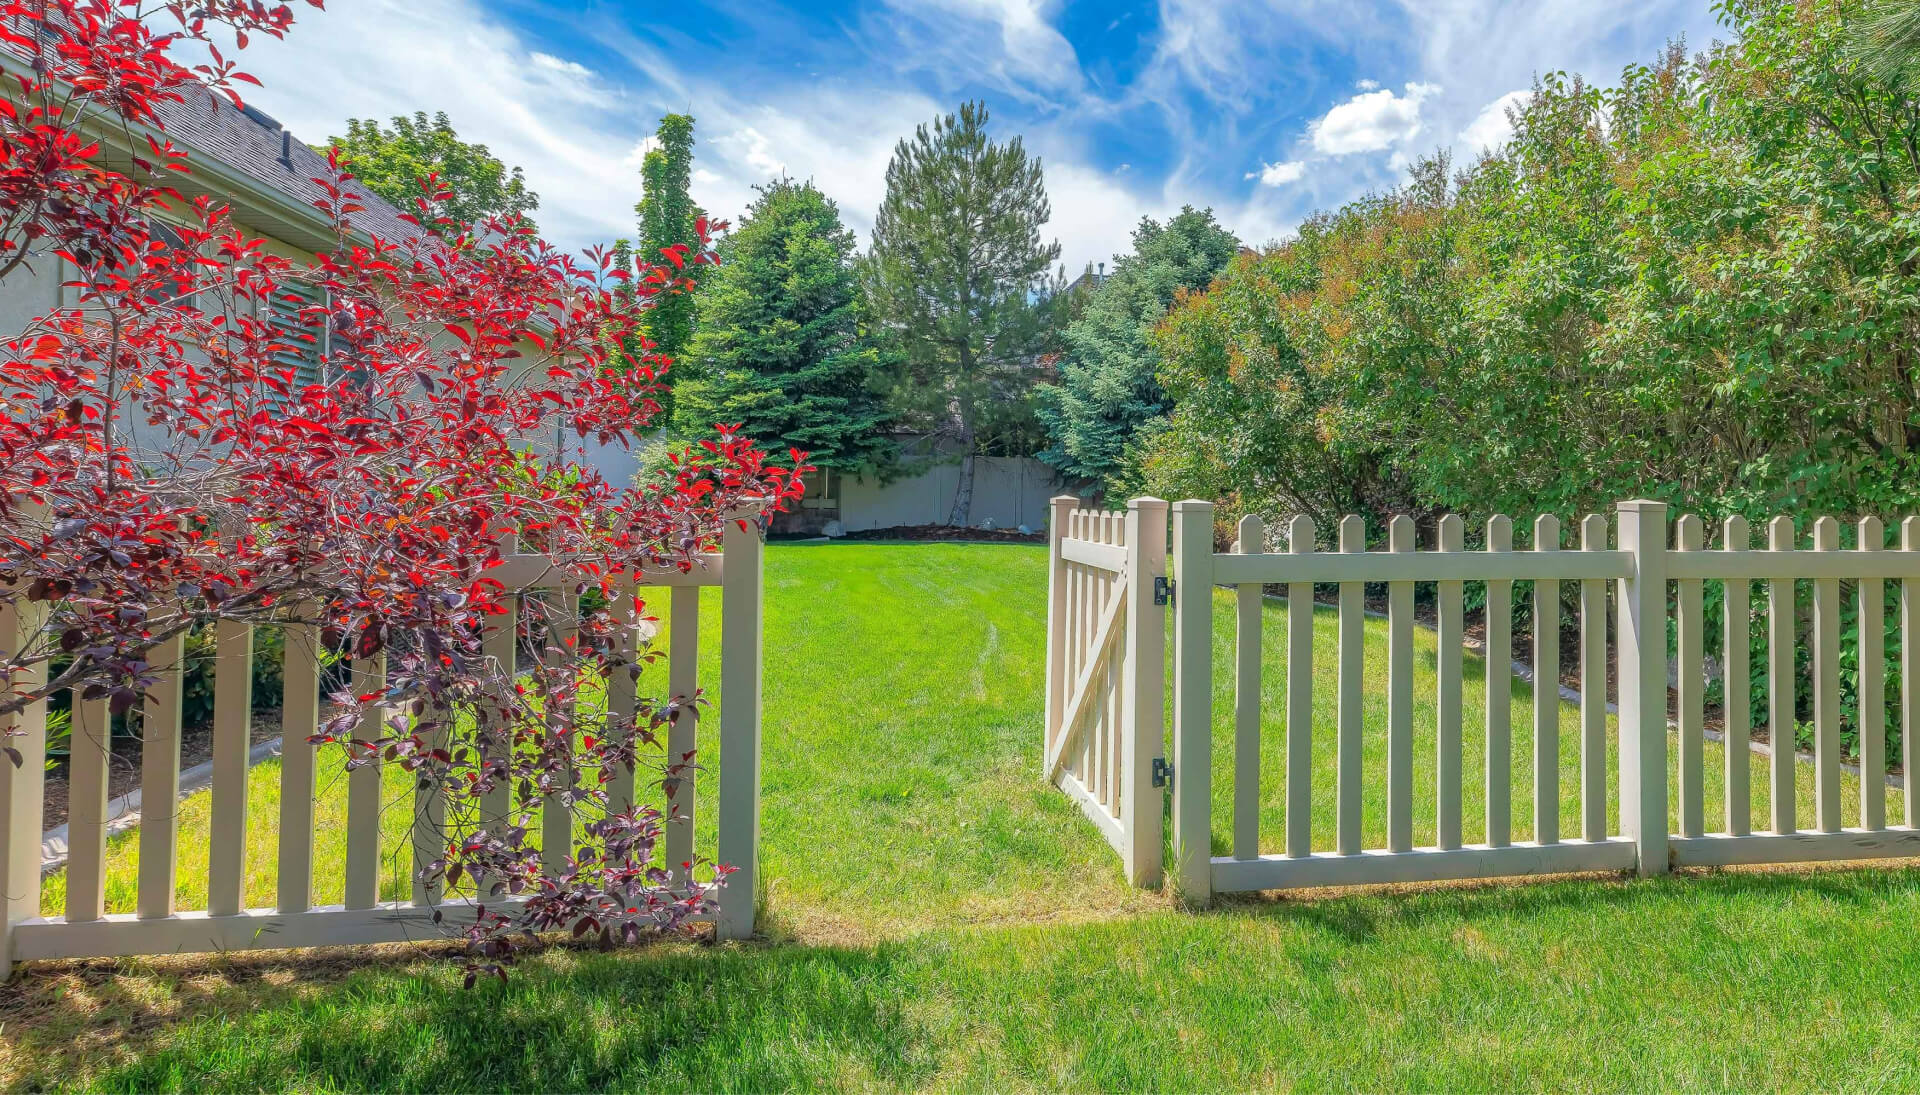 A functional fence gate providing access to a well-maintained backyard, surrounded by a wooden fence in Chesterfield